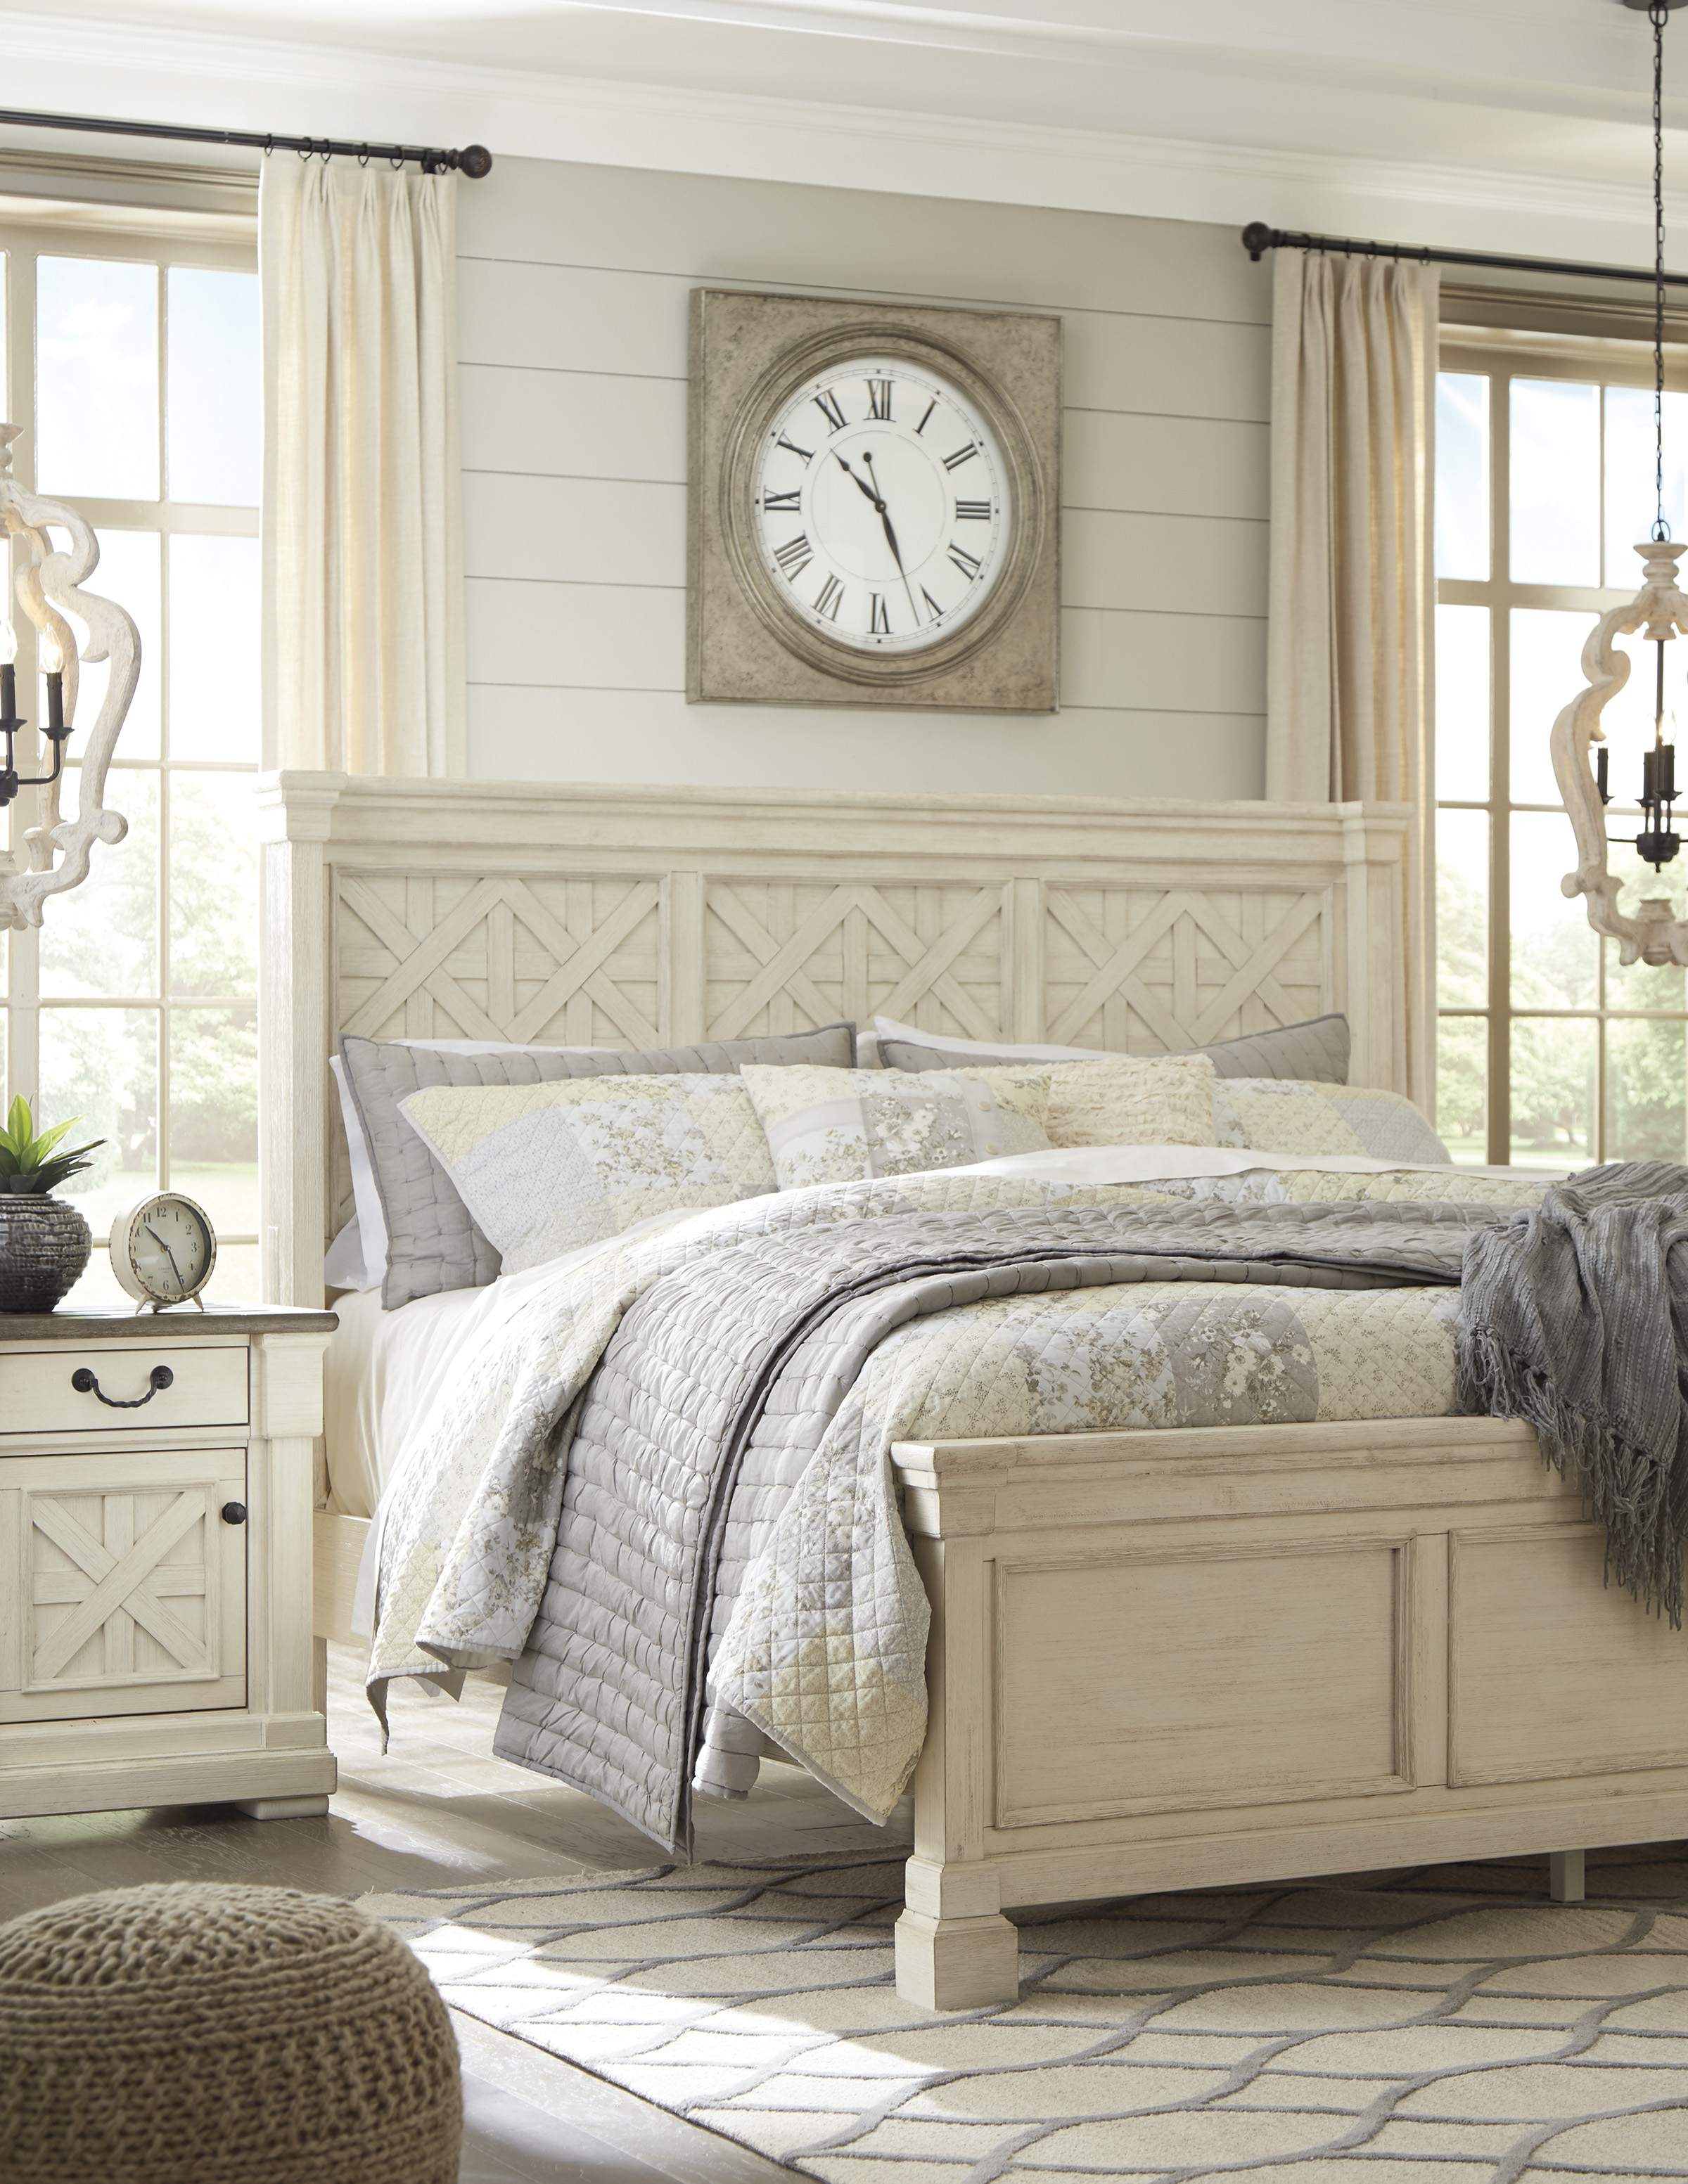 Watsonia Wooden Farmhouse King Bed with 2 Bed Side Table